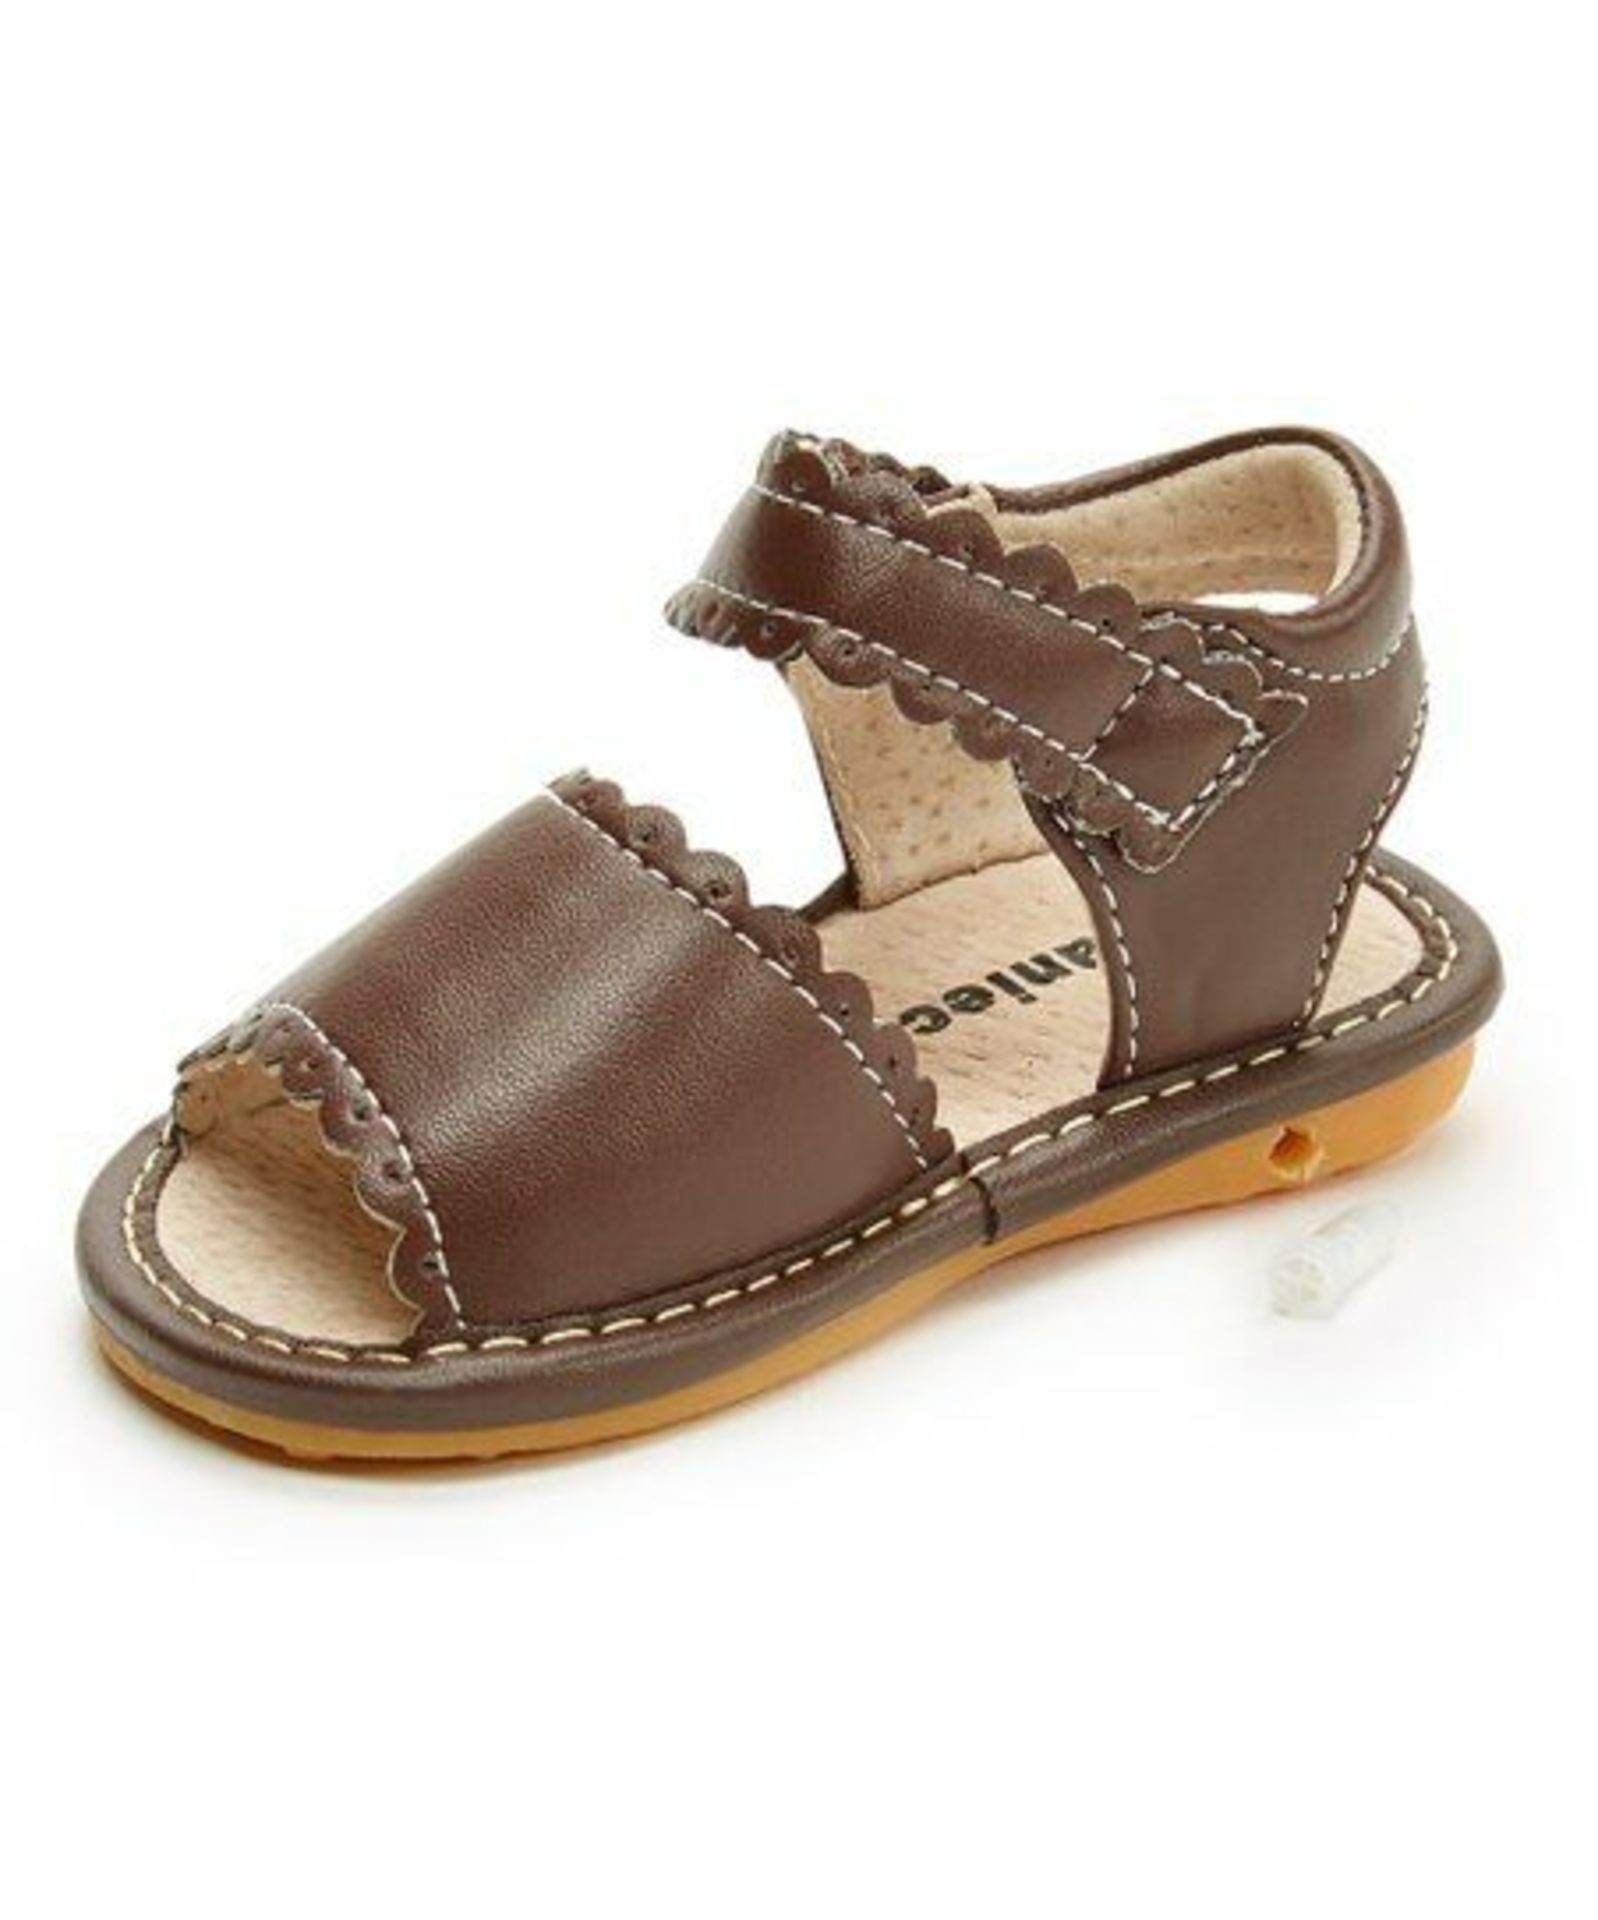 Laniecakes Brown Scallop Emily Squeaker Sandal (Uk Size:2/Us Size:3) (New Without Box) [Ref: - Image 2 of 2